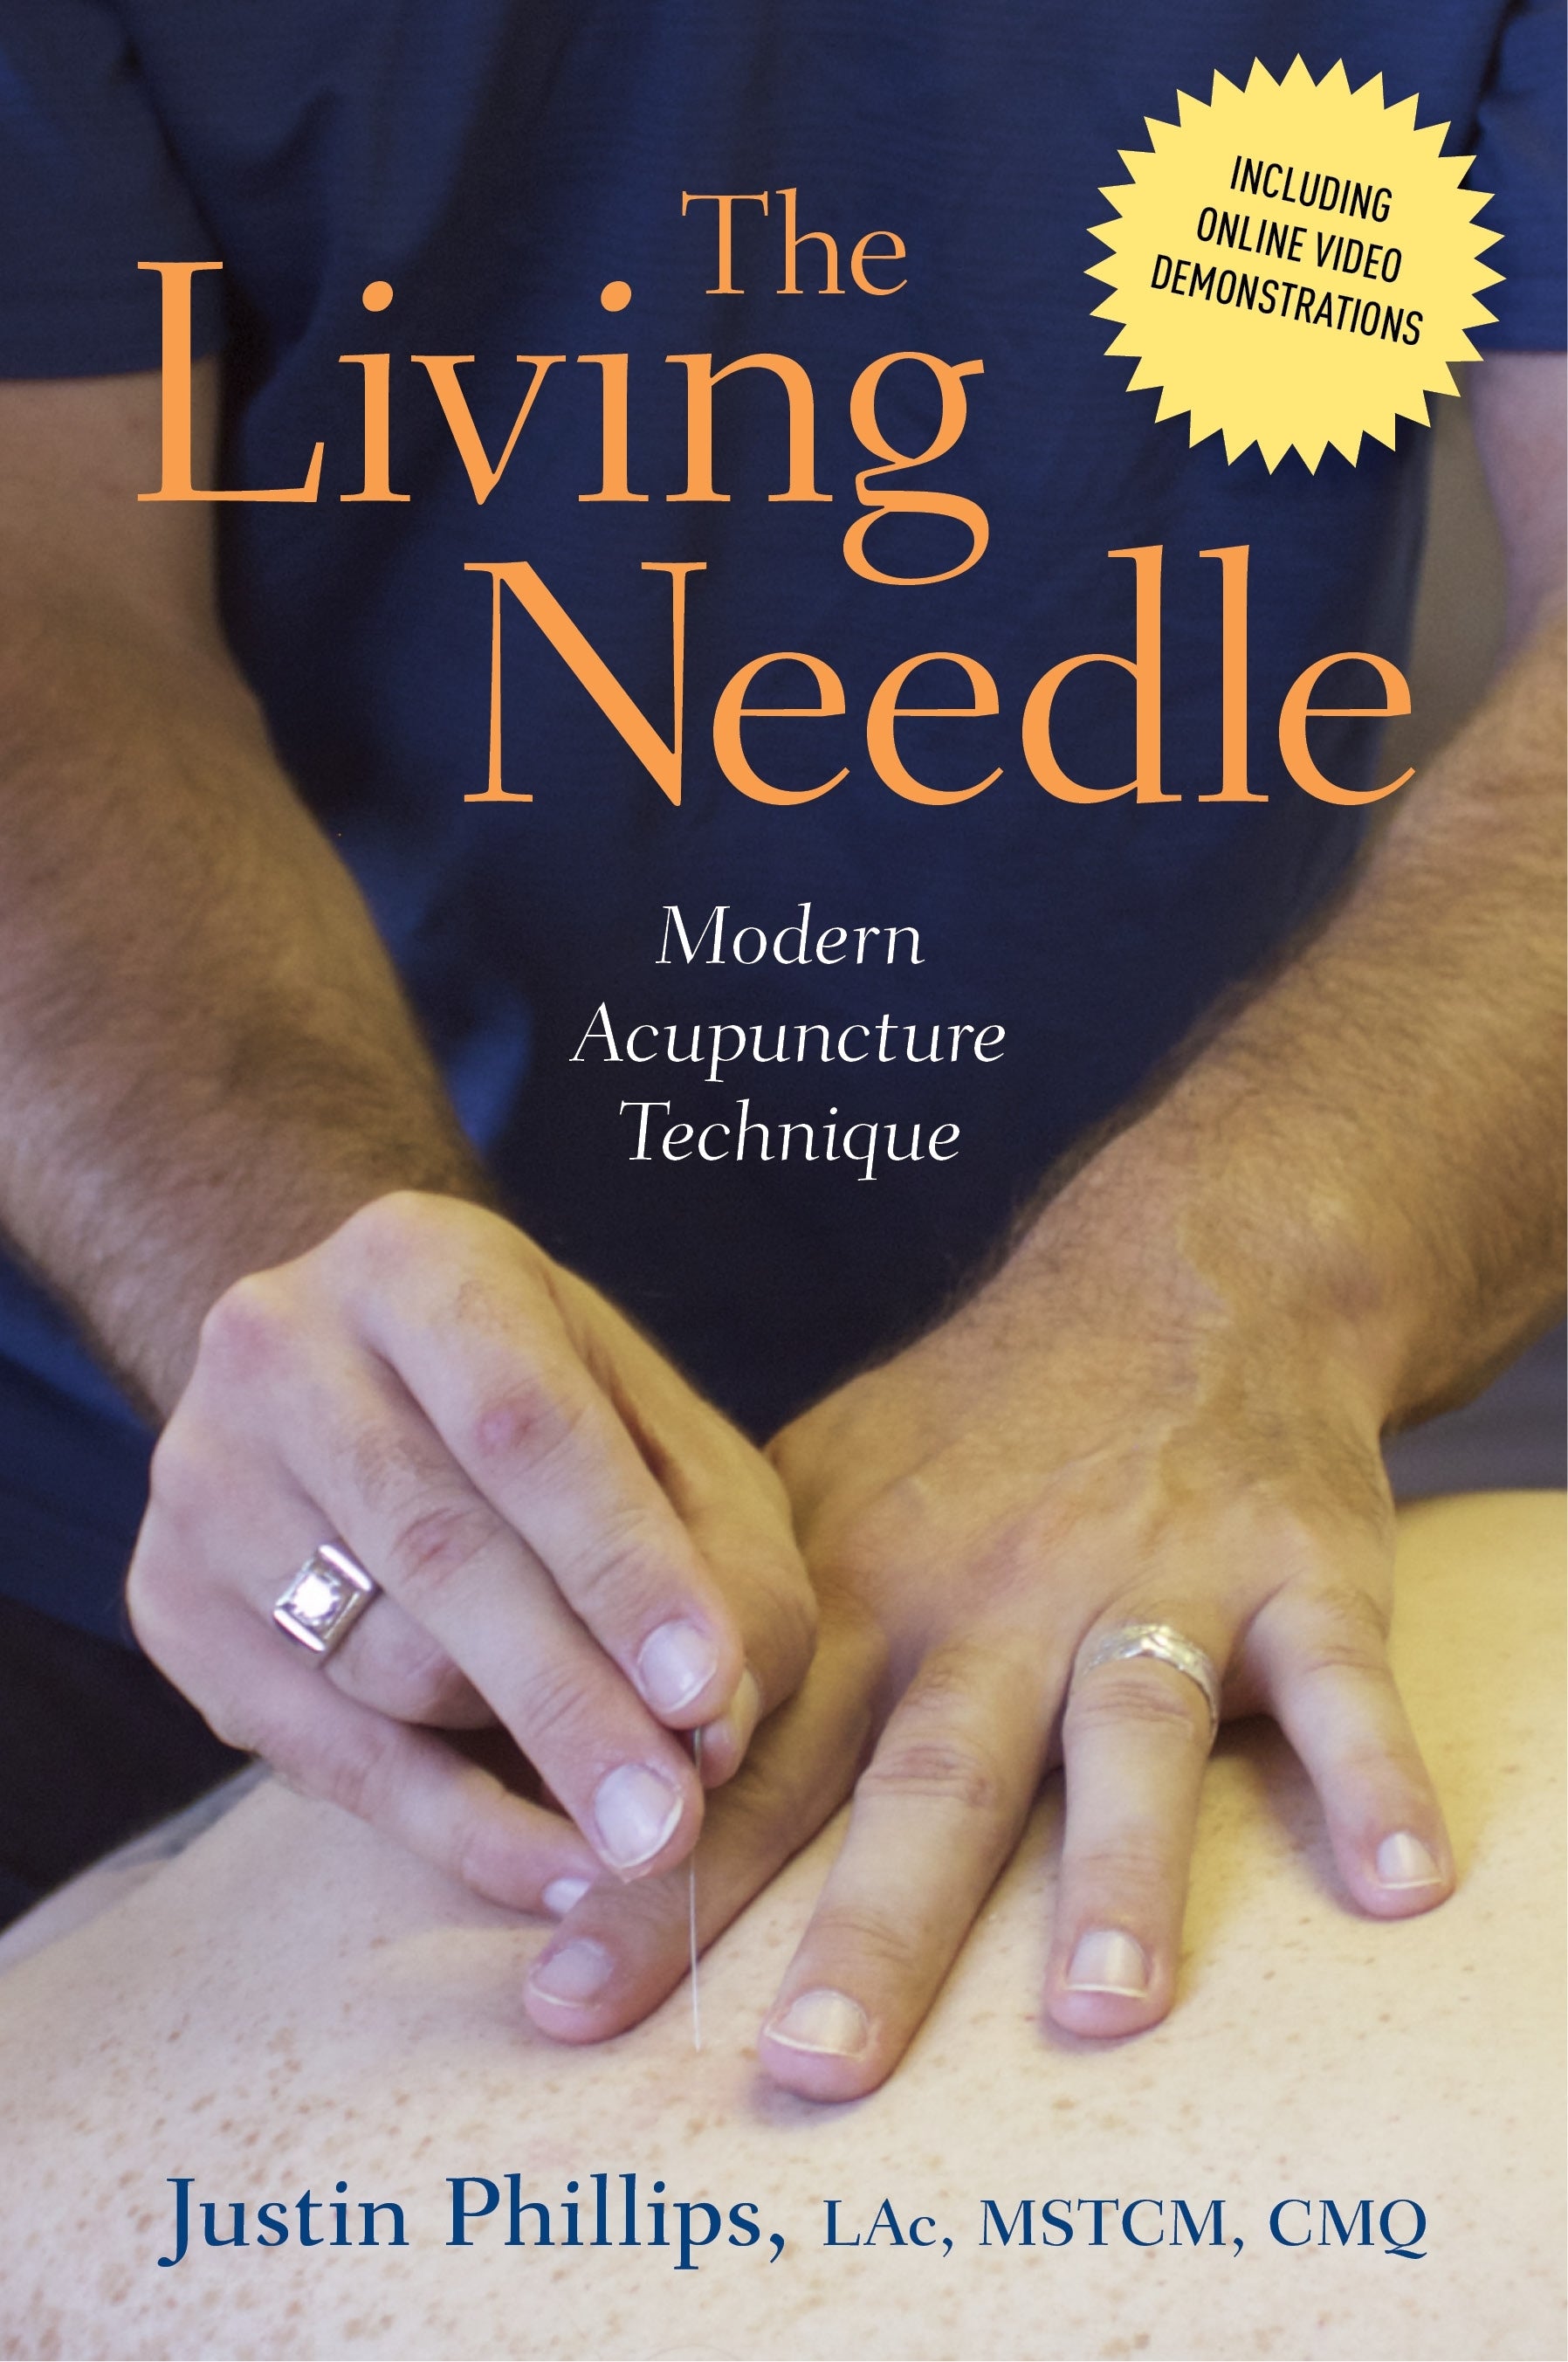 The Living Needle by Justin Phillips